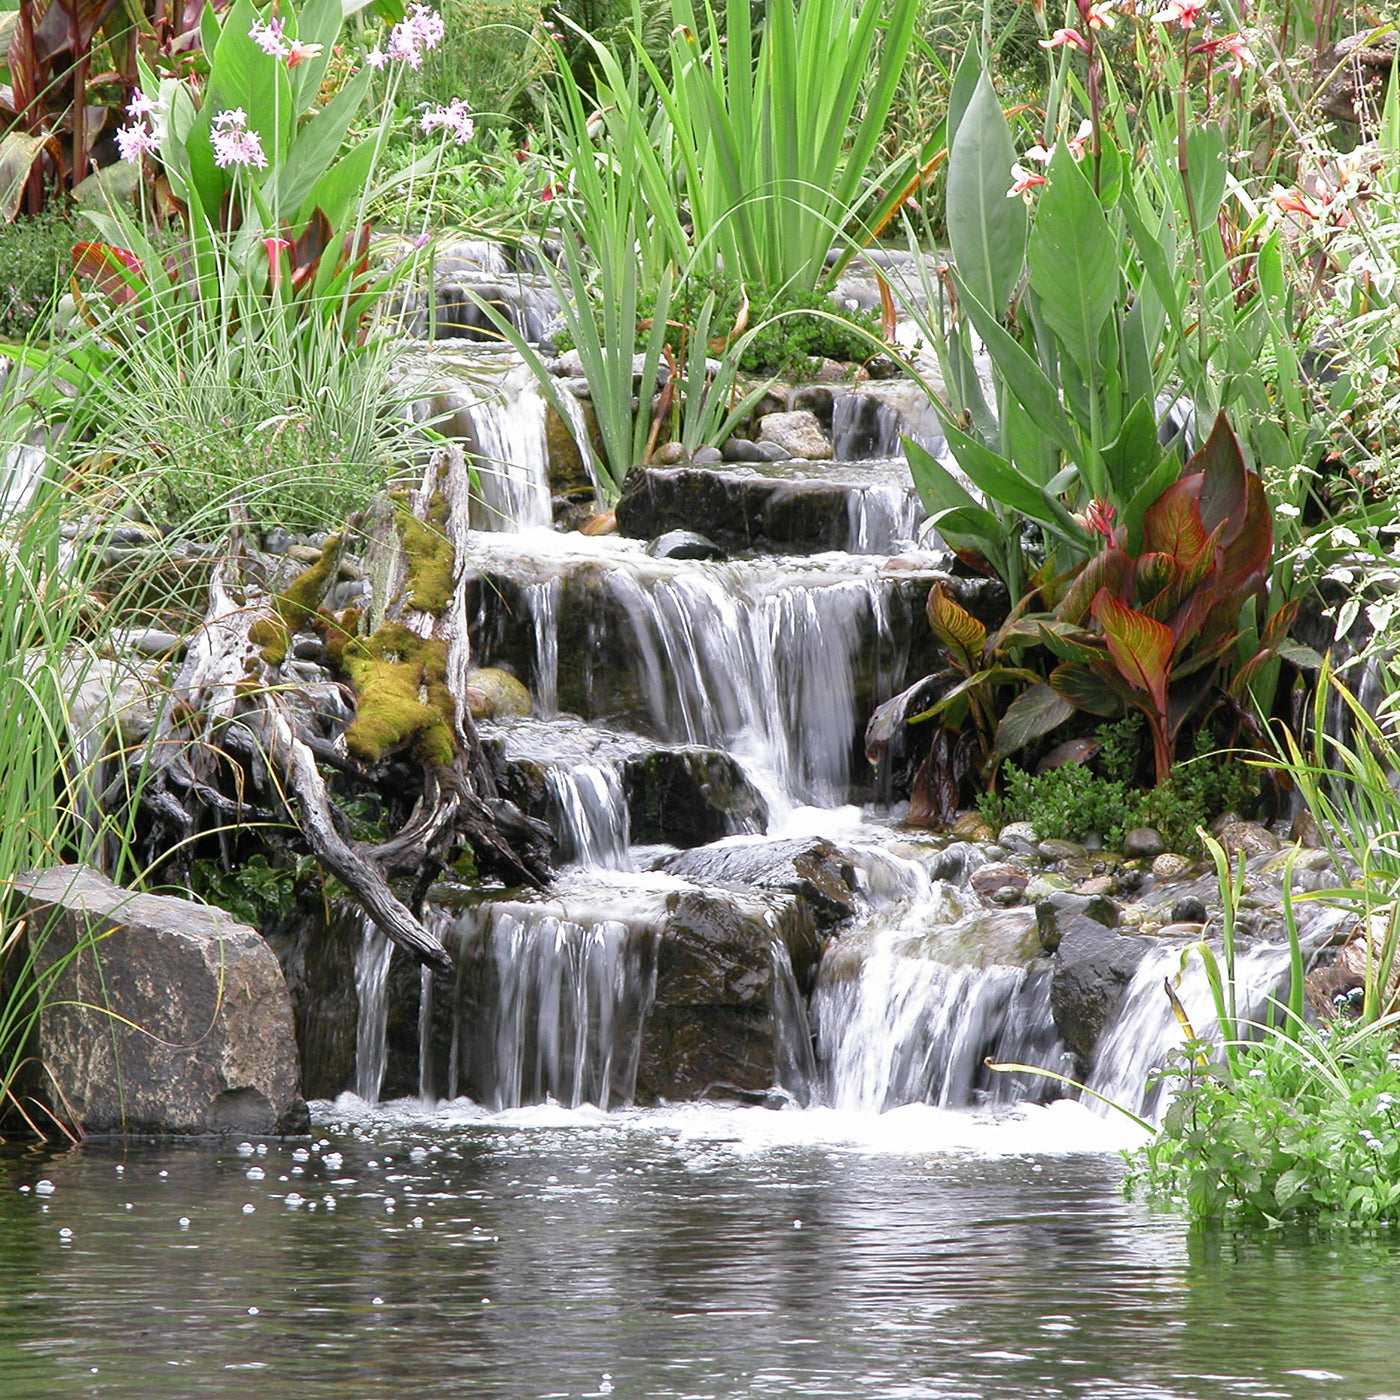 Large multi stepped waterfalls into a pond with blooming plants - built by Russell Watergardens using a custom pond kit